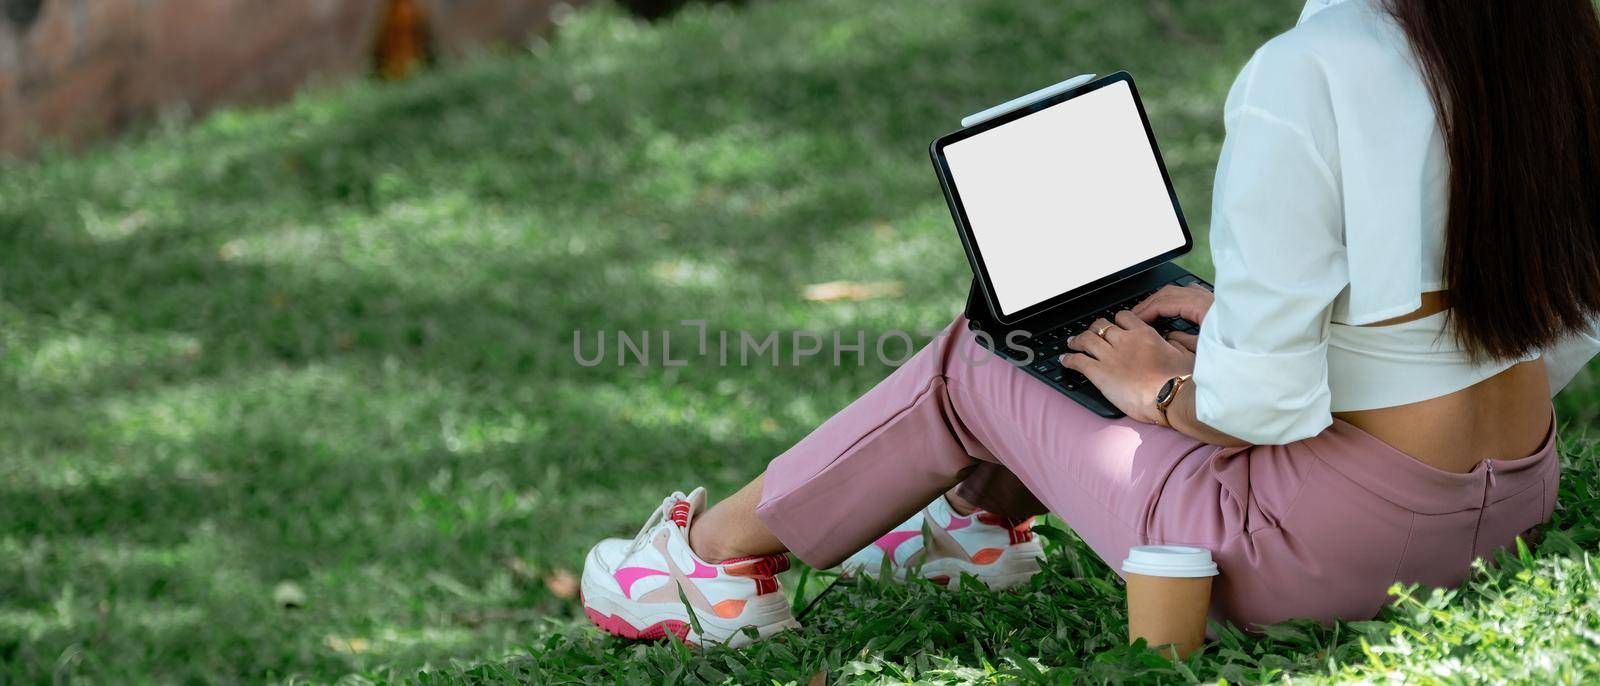 Close up student with digital tablet blank screen sitting on green grass lawn writing in notebook, technology in education, college, high school, teens concept. by nateemee